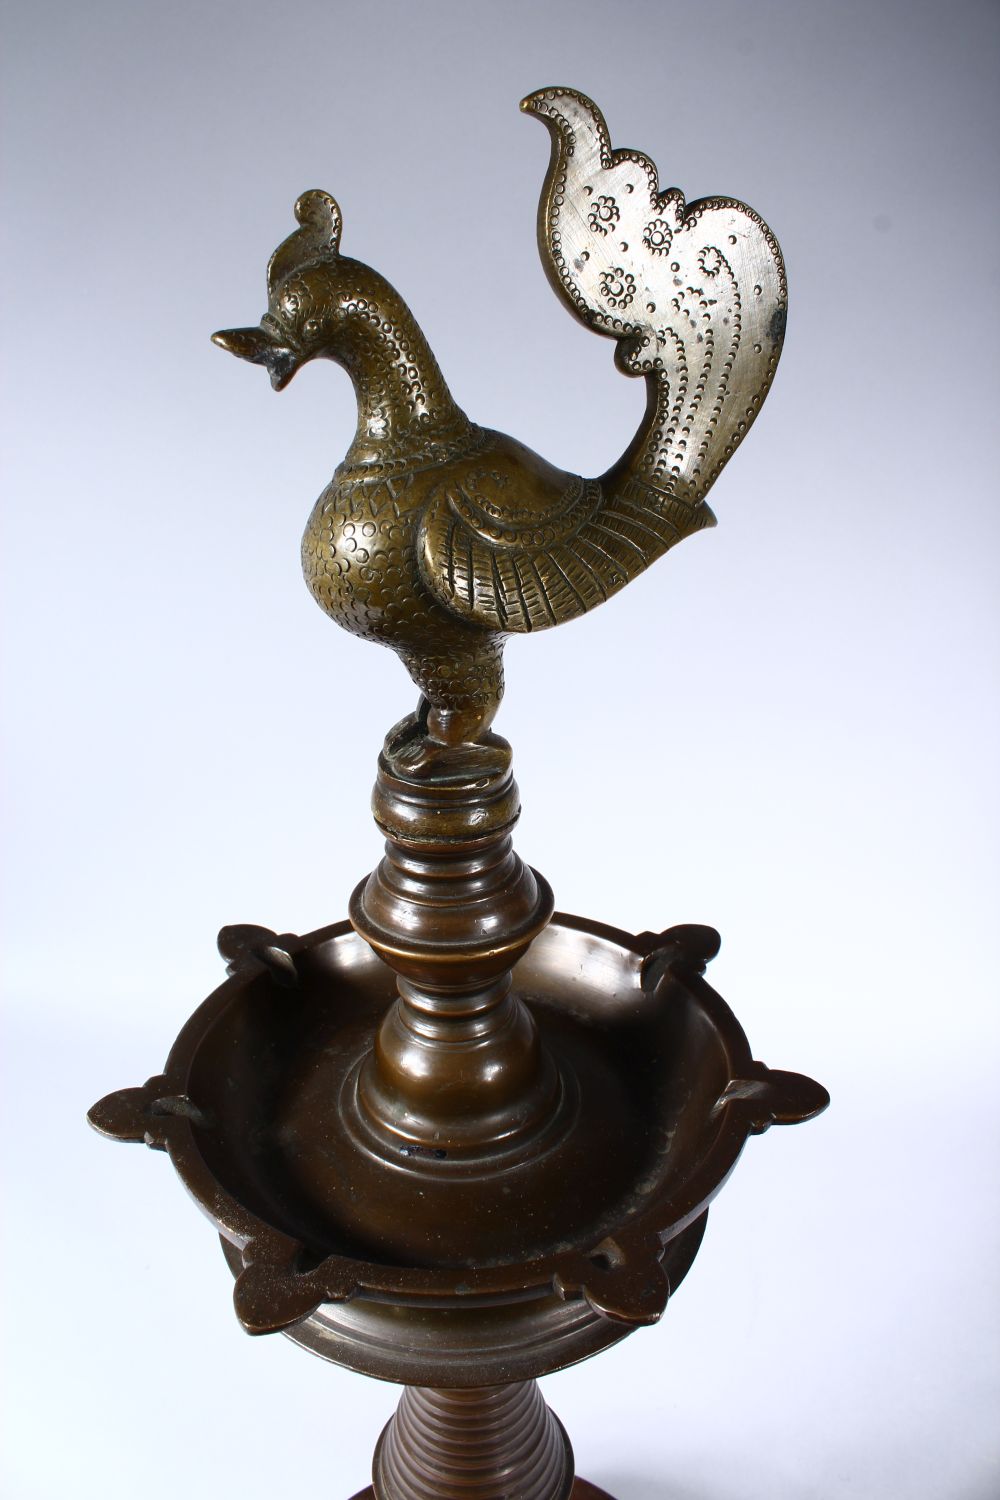 A GOOD 19TH CENTURY INDIAN BRONZE LAMP, with cockerel finial on a circular base, 60cm high. - Image 2 of 4